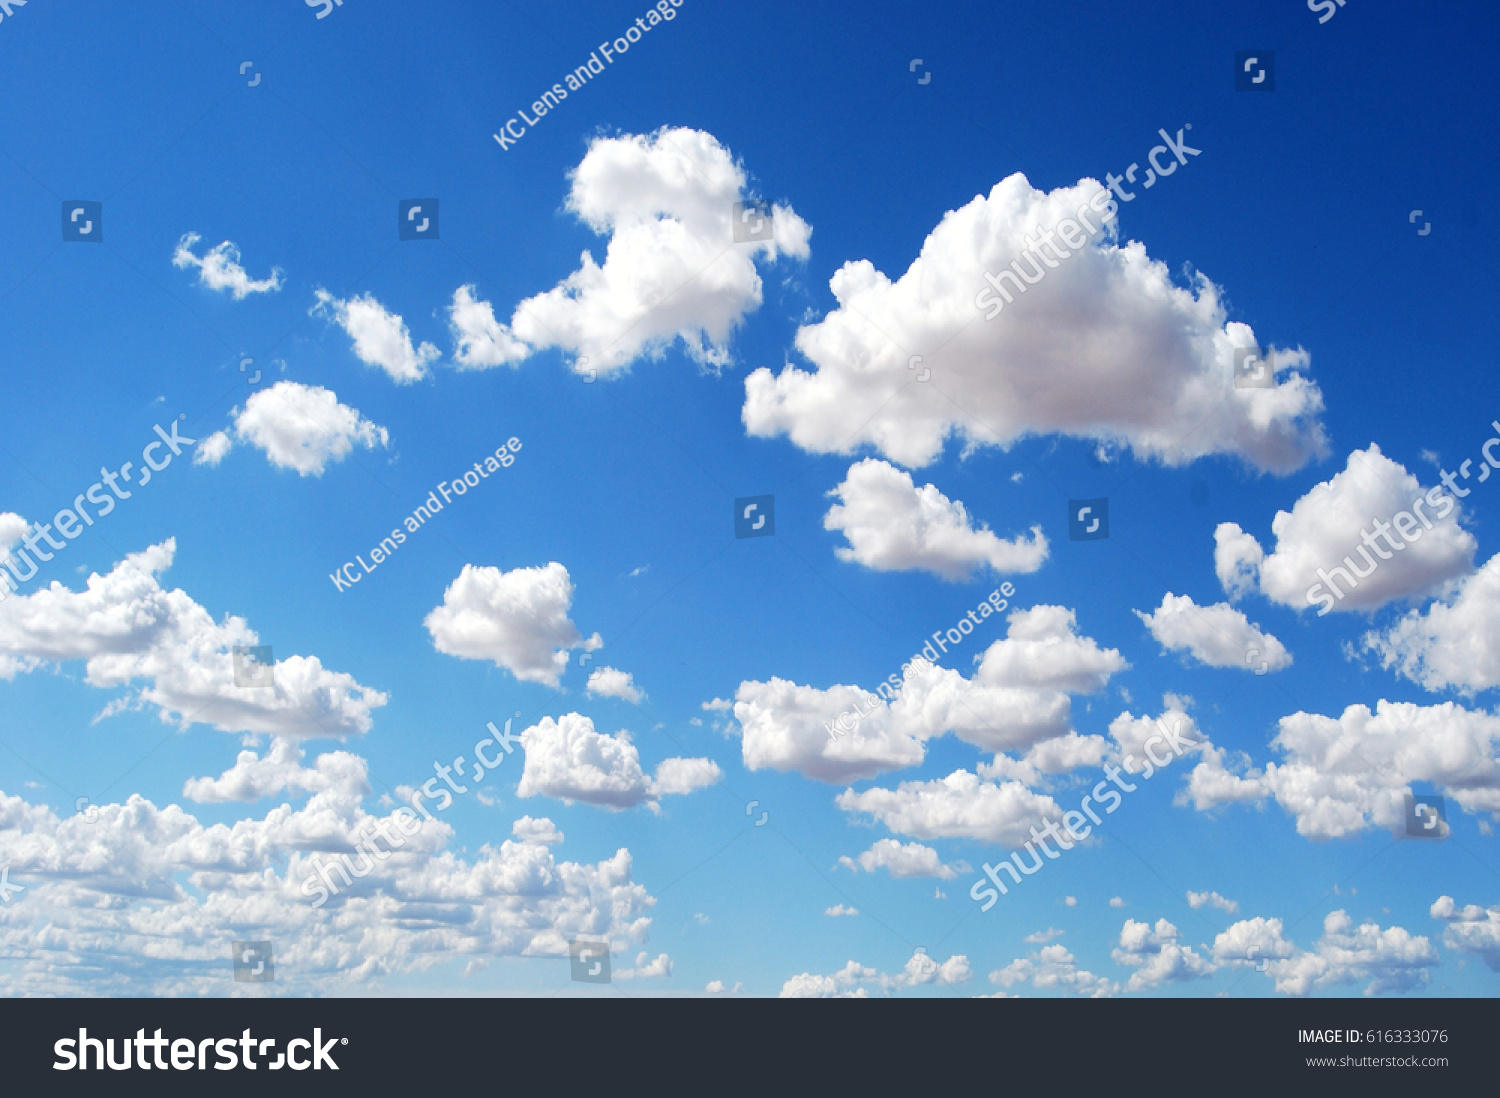 Blue sky background with clouds #616333076